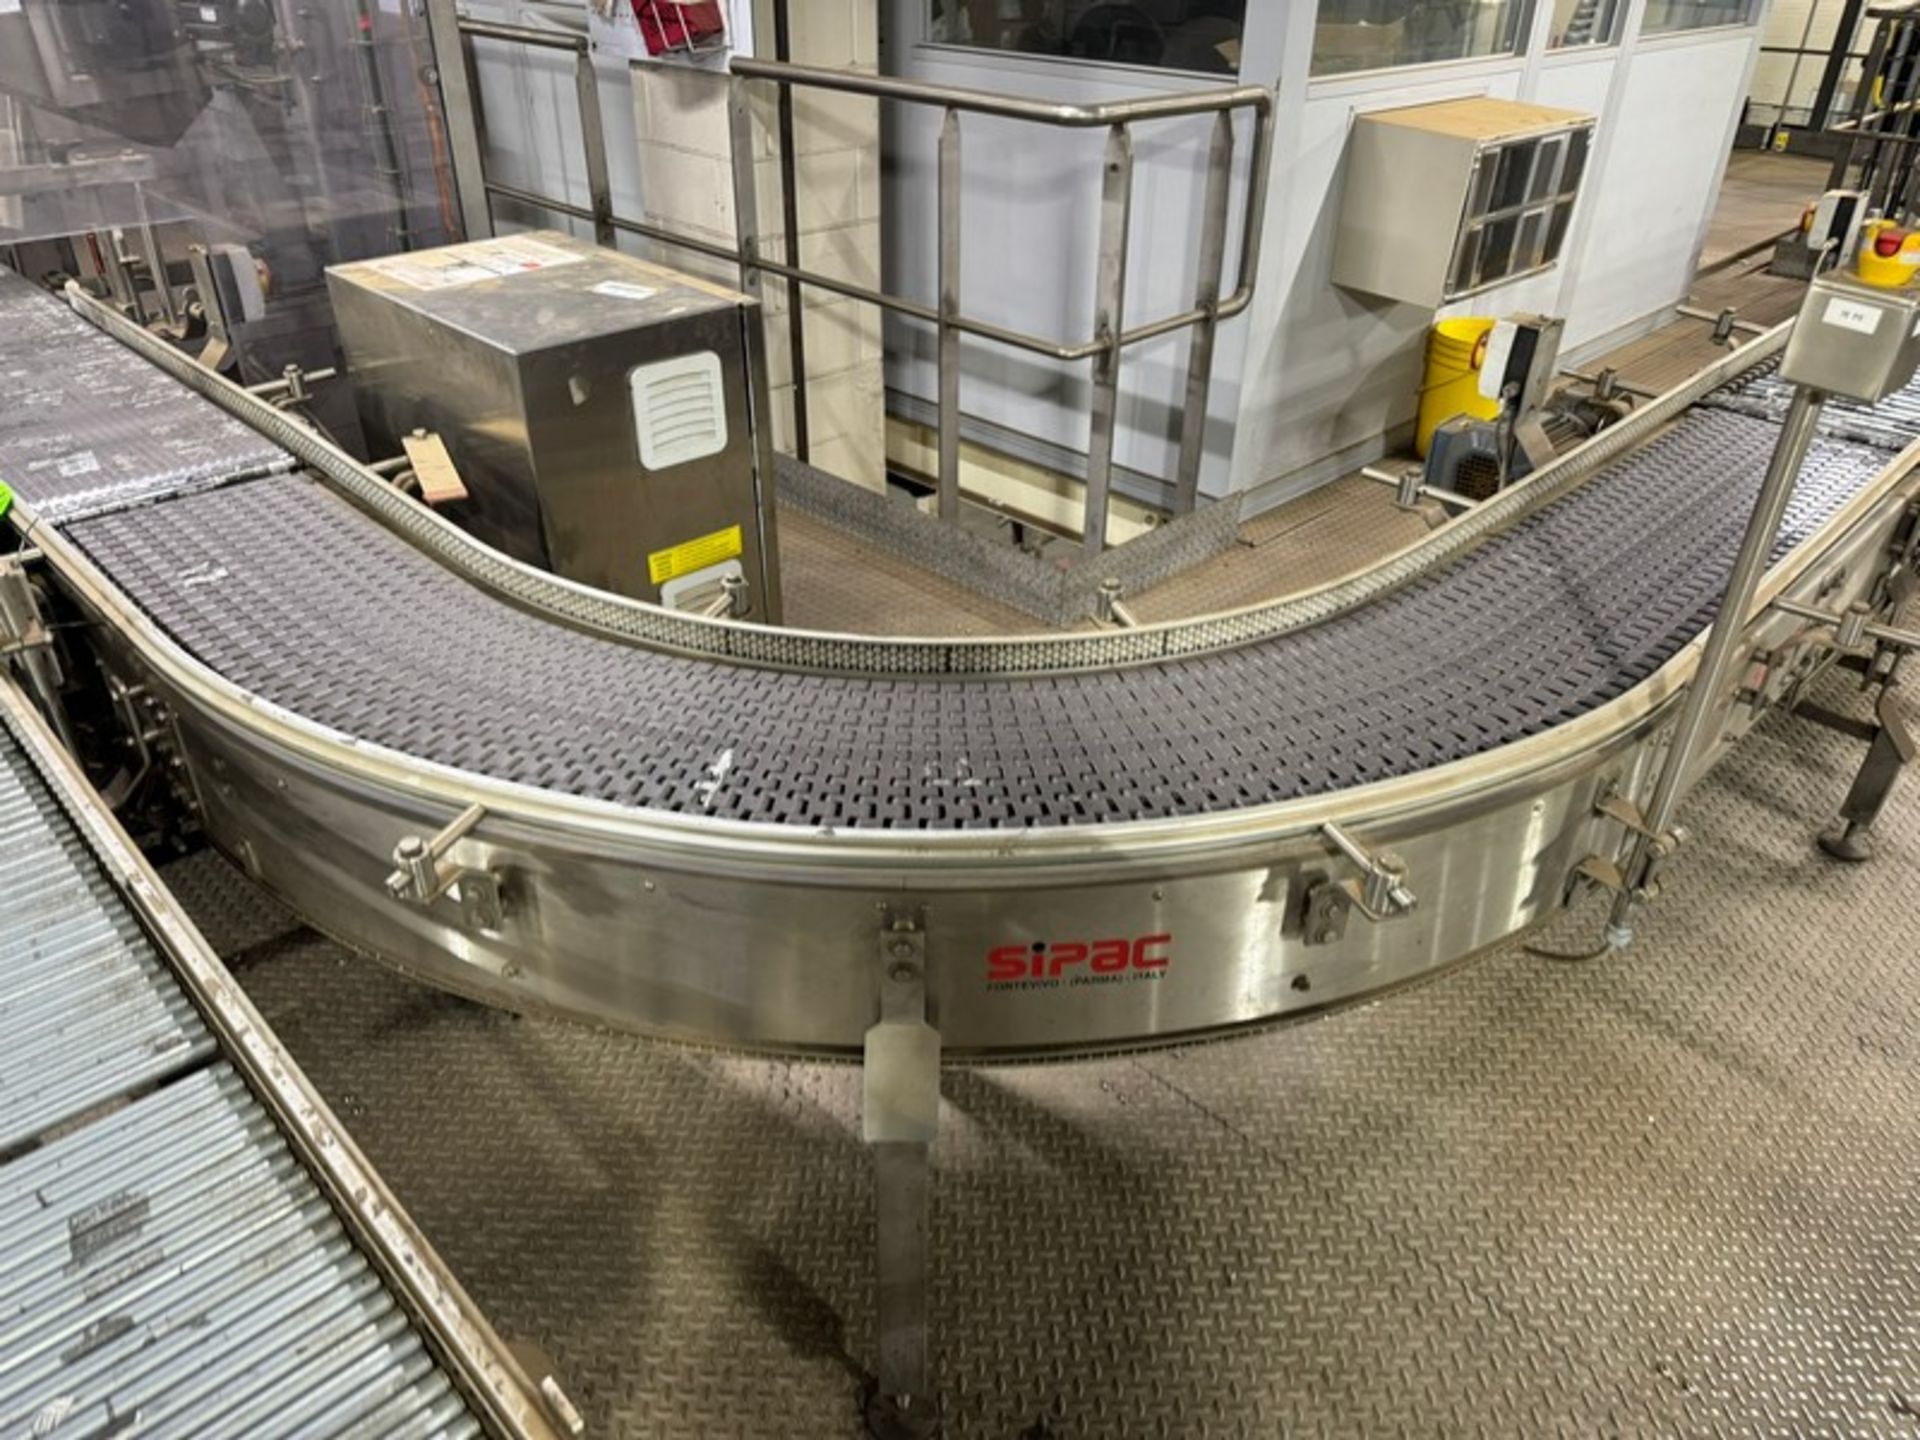 SIPAC Conveyor & Roller Conveyor, with 1-90 Degree Turn, with Aprox. 12” W Conveyor Belt, with - Image 6 of 6